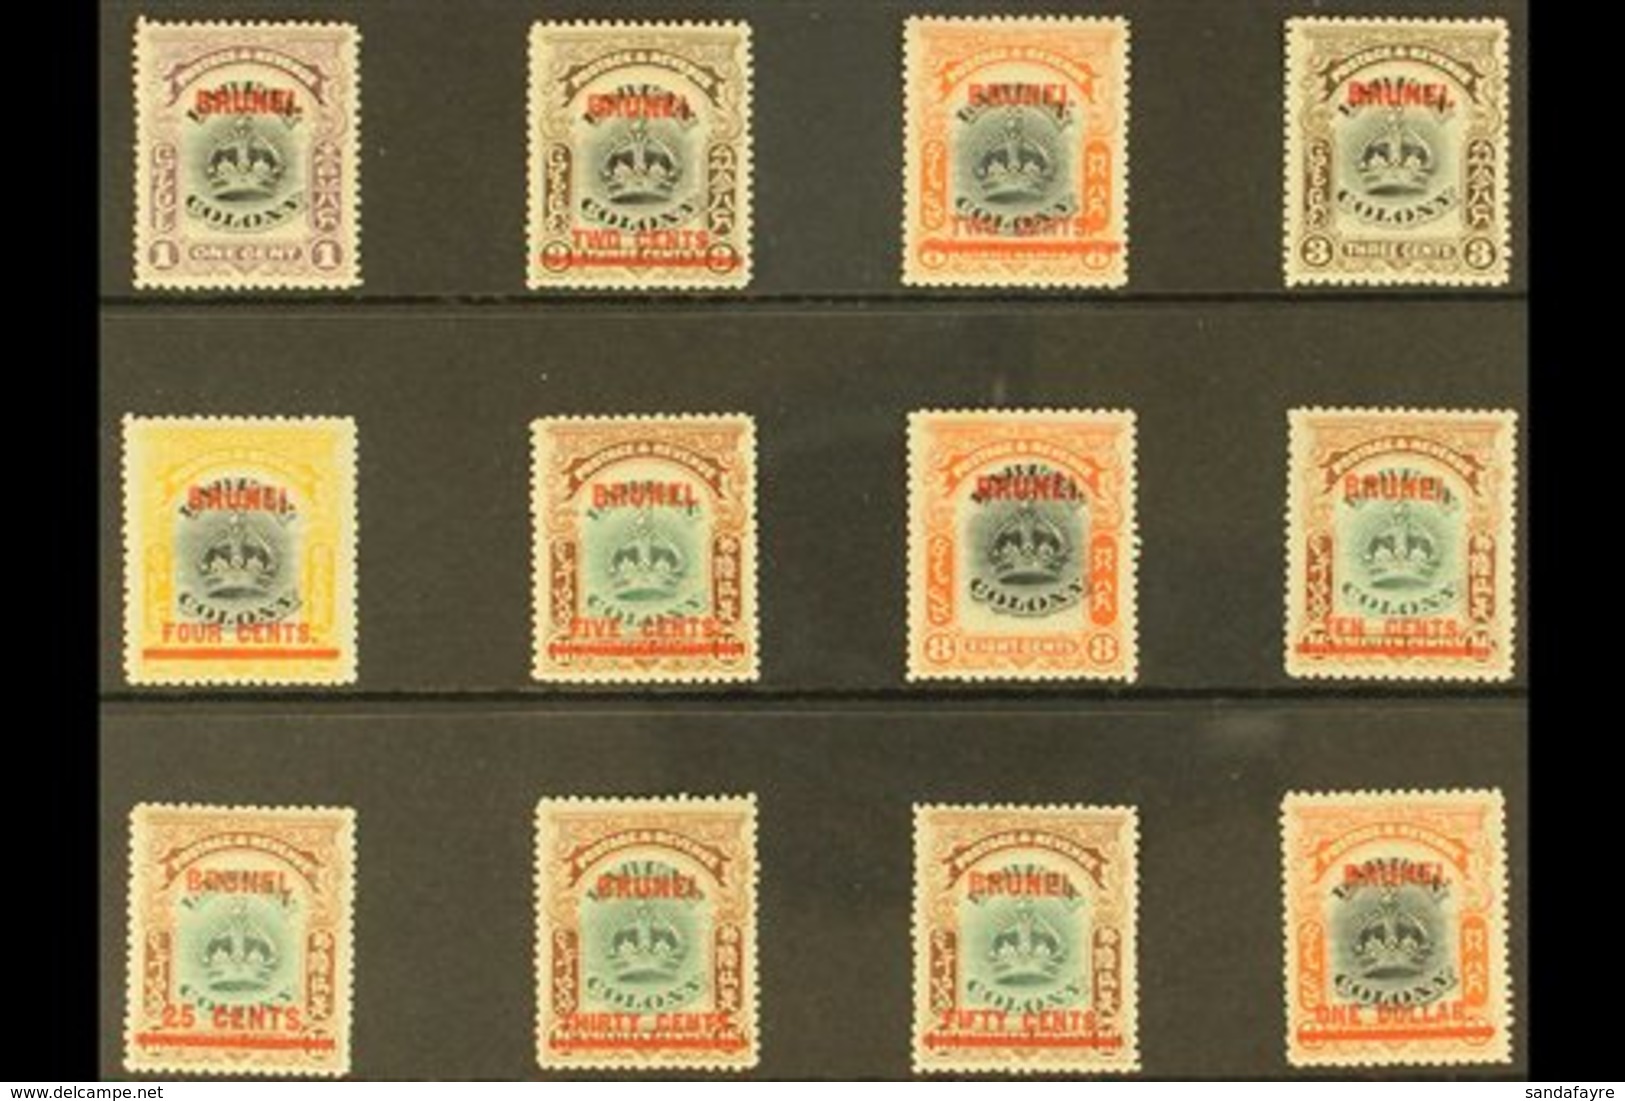 1906 Labuan Crown Colony "Brunei" Opt'd Set, SG 11/22, Fine Mint, Two Tiny Hinge Thins Do Not Detract (12 Stamps) For Mo - Brunei (...-1984)